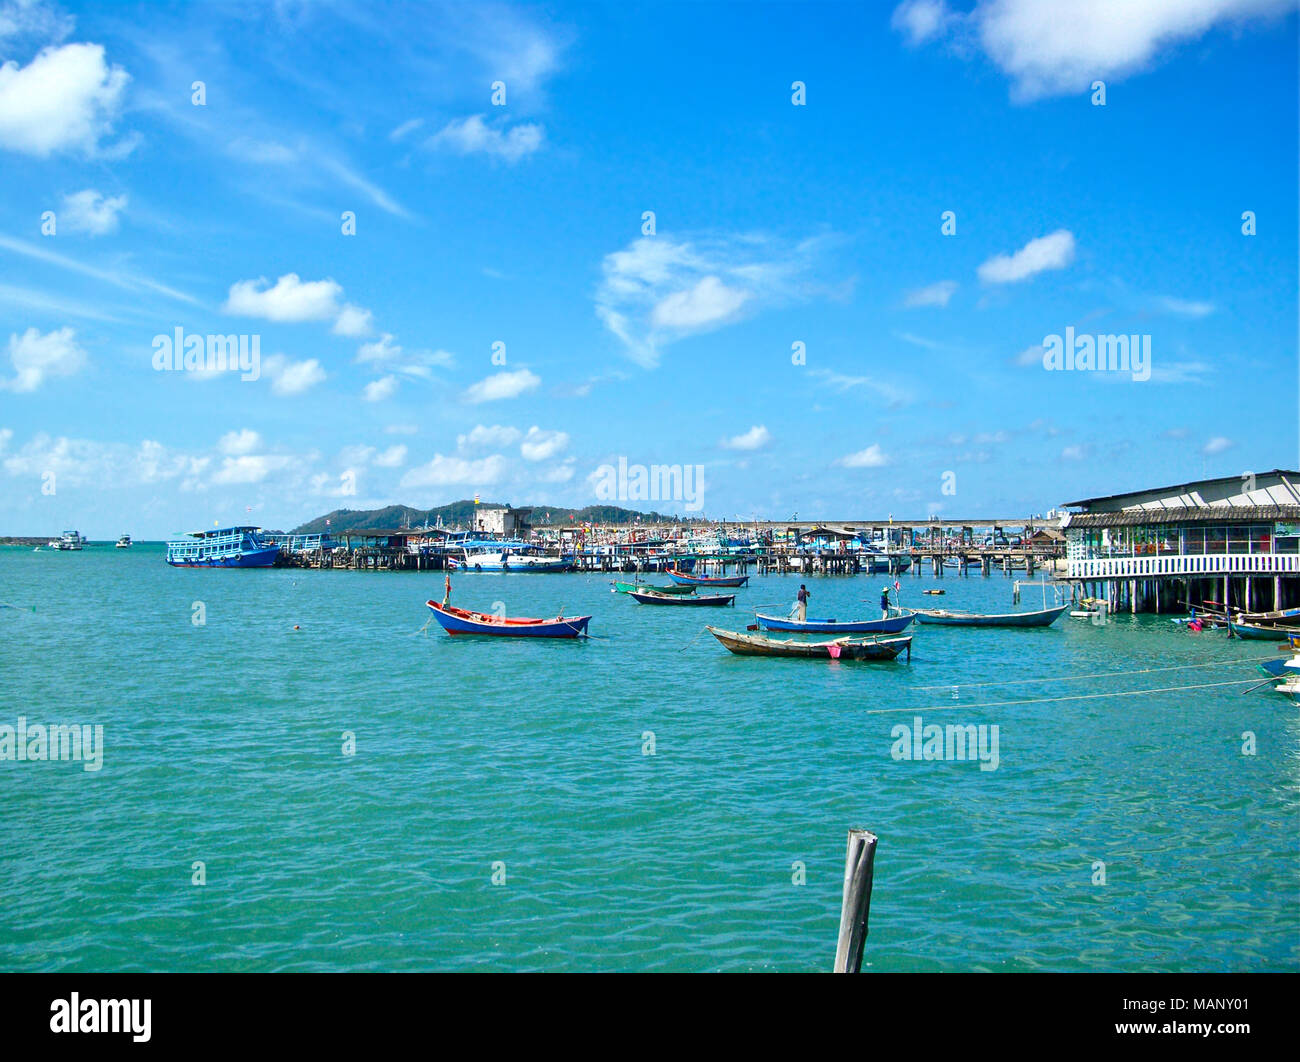 Tropical sea scene on Thailand, Pattaya. Panoramic sea scene with boats, turquoise water and blue sky. Stock Photo